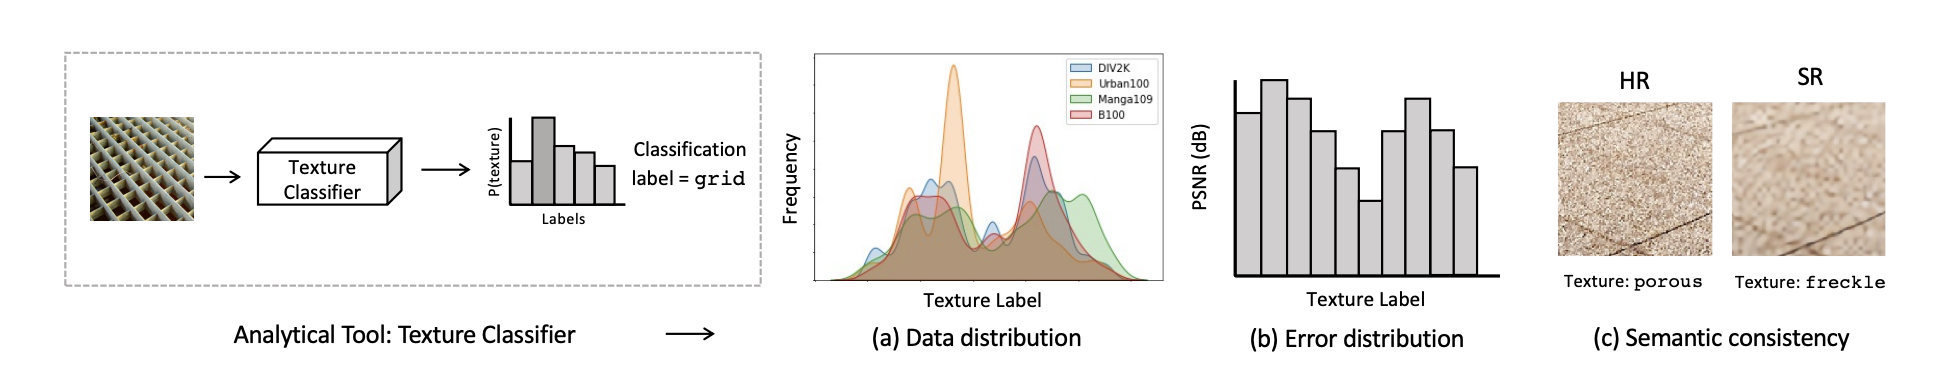 Texture-based Error Analysis for Image Super-Resolution